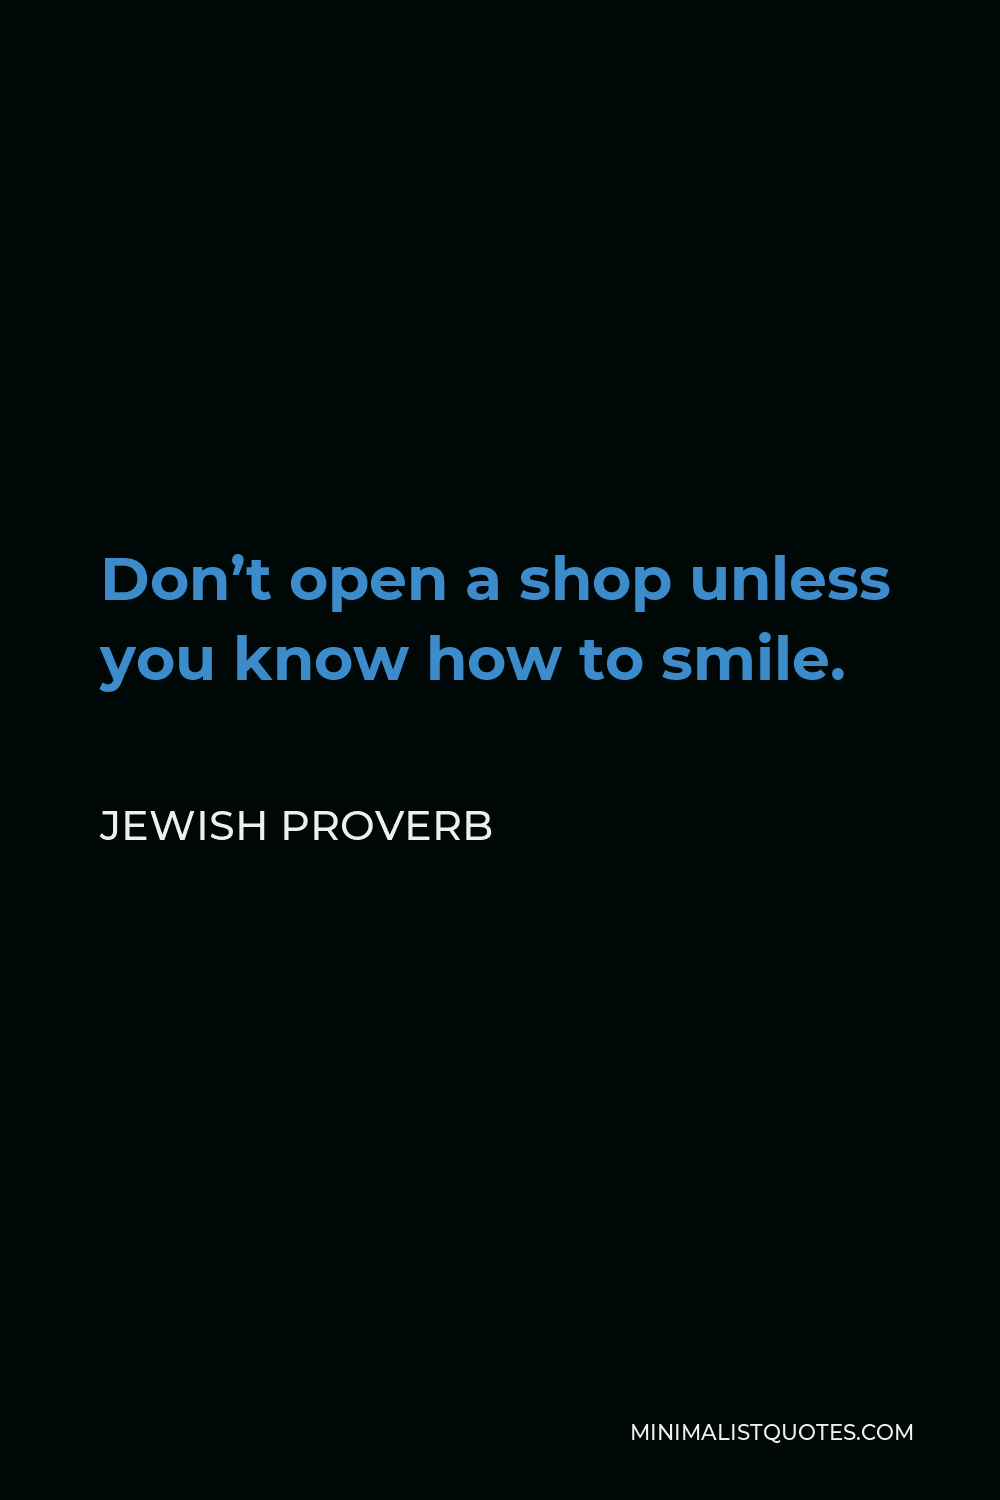 Jewish Proverb Quote - Don’t open a shop unless you know how to smile.